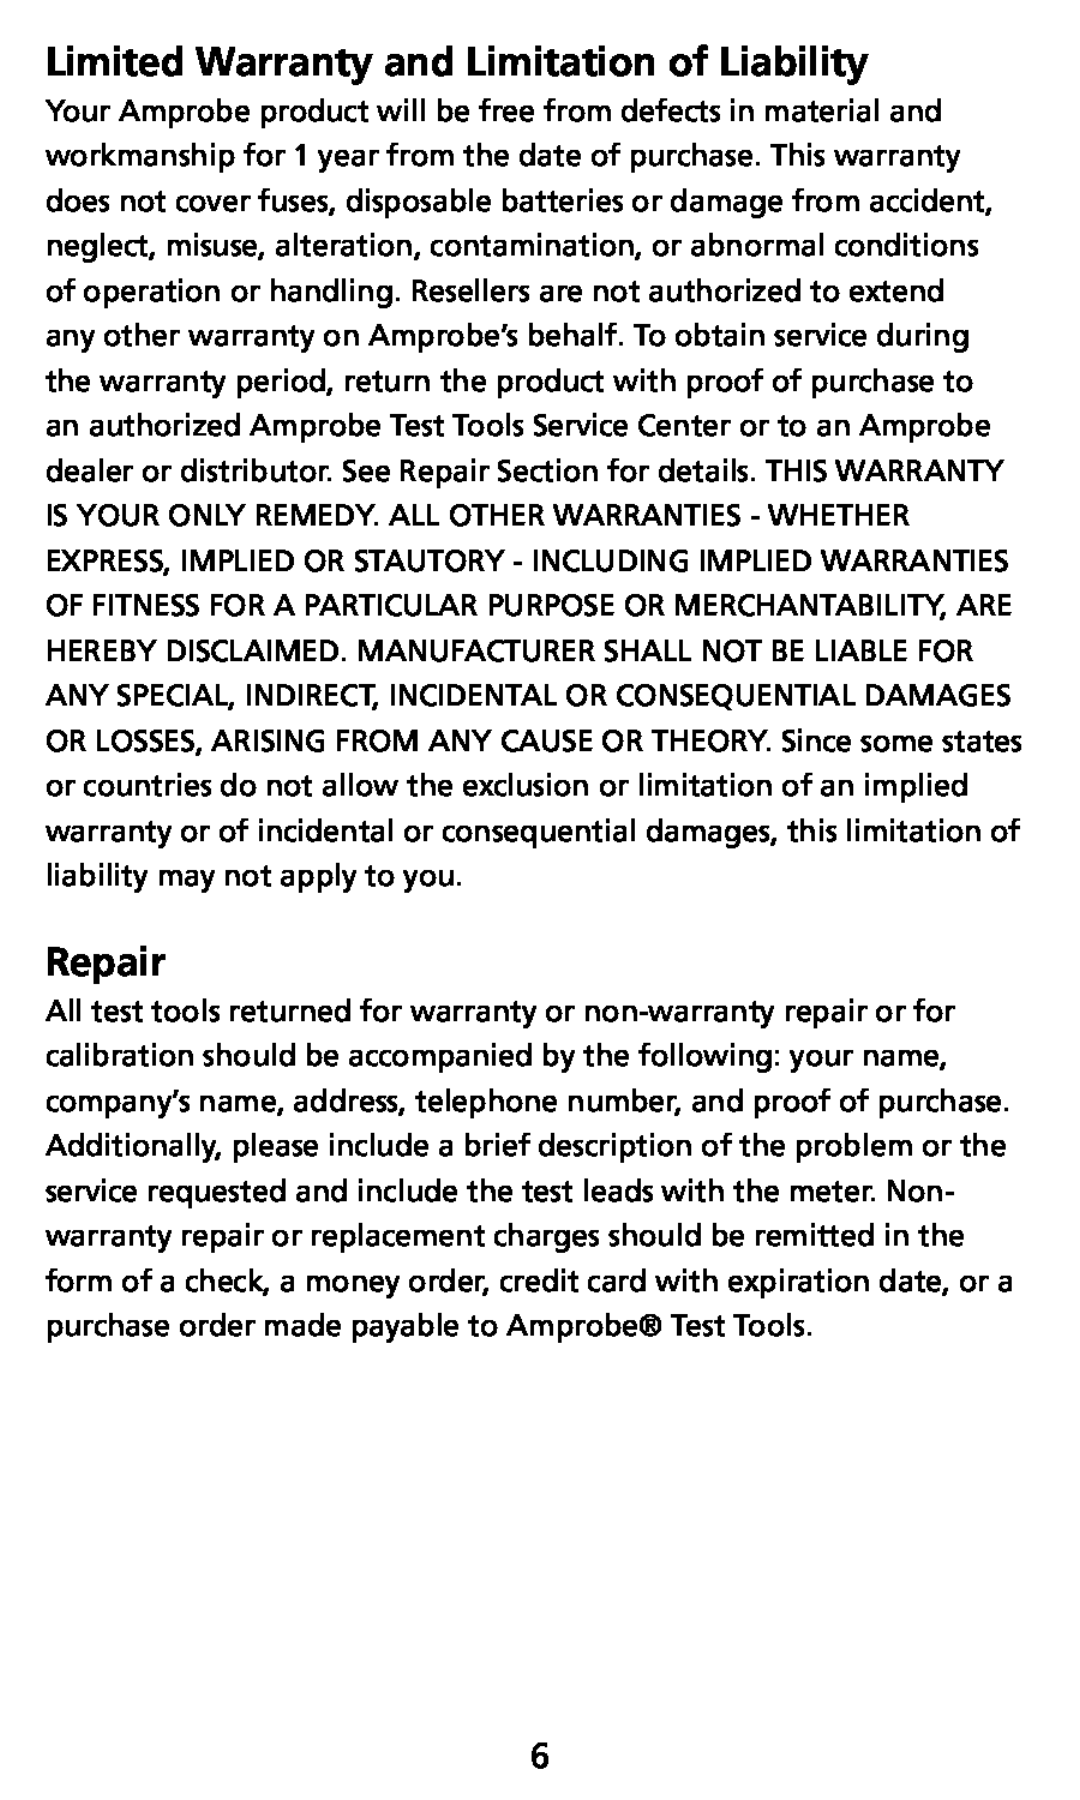 Ampro Corporation TH-3, THWD-3 user manual Limited Warranty and Limitation of Liability, Repair 